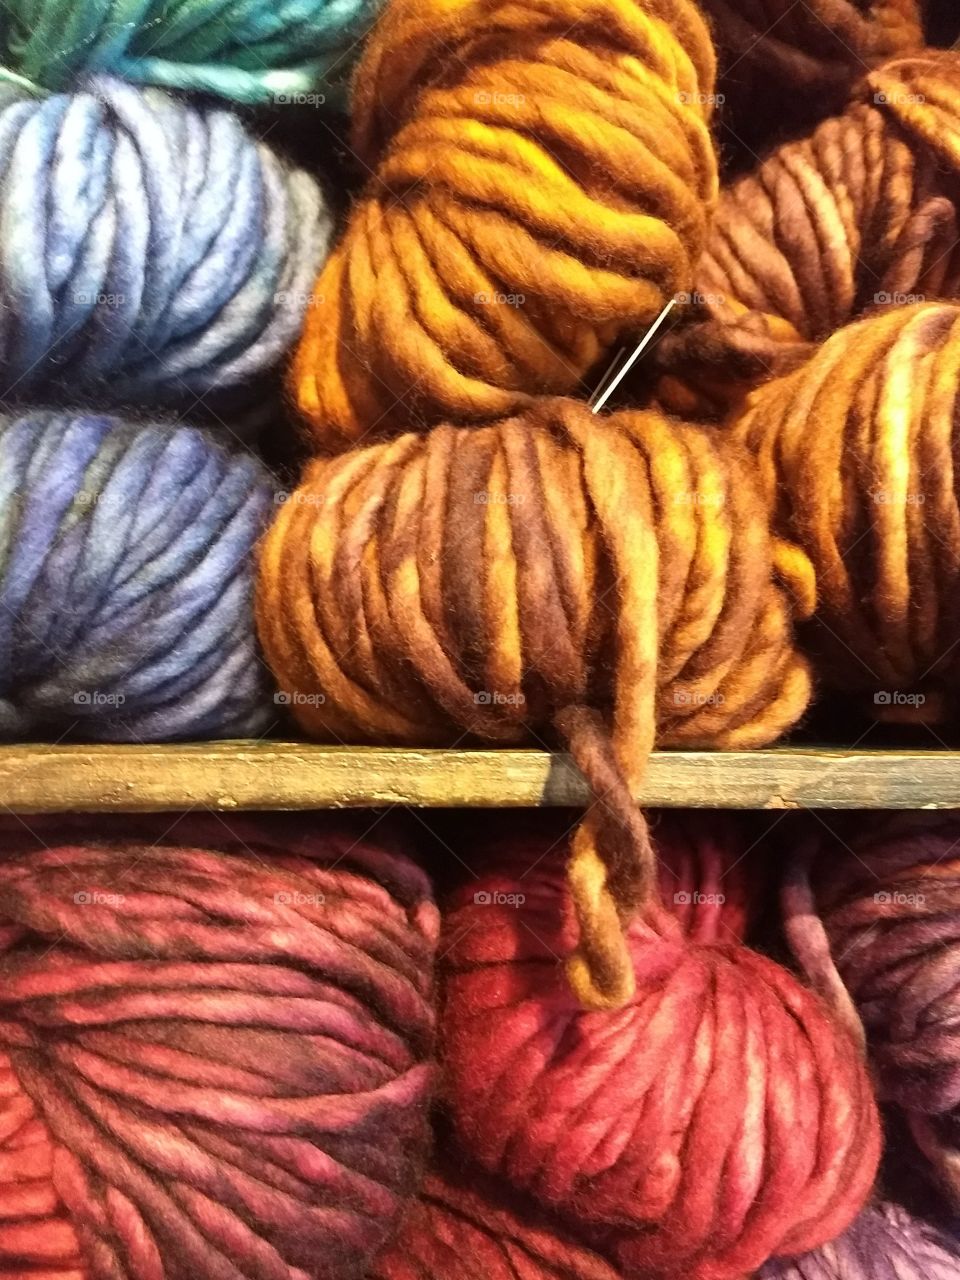 Colorful skeins of yarn on display in a fabric shop.